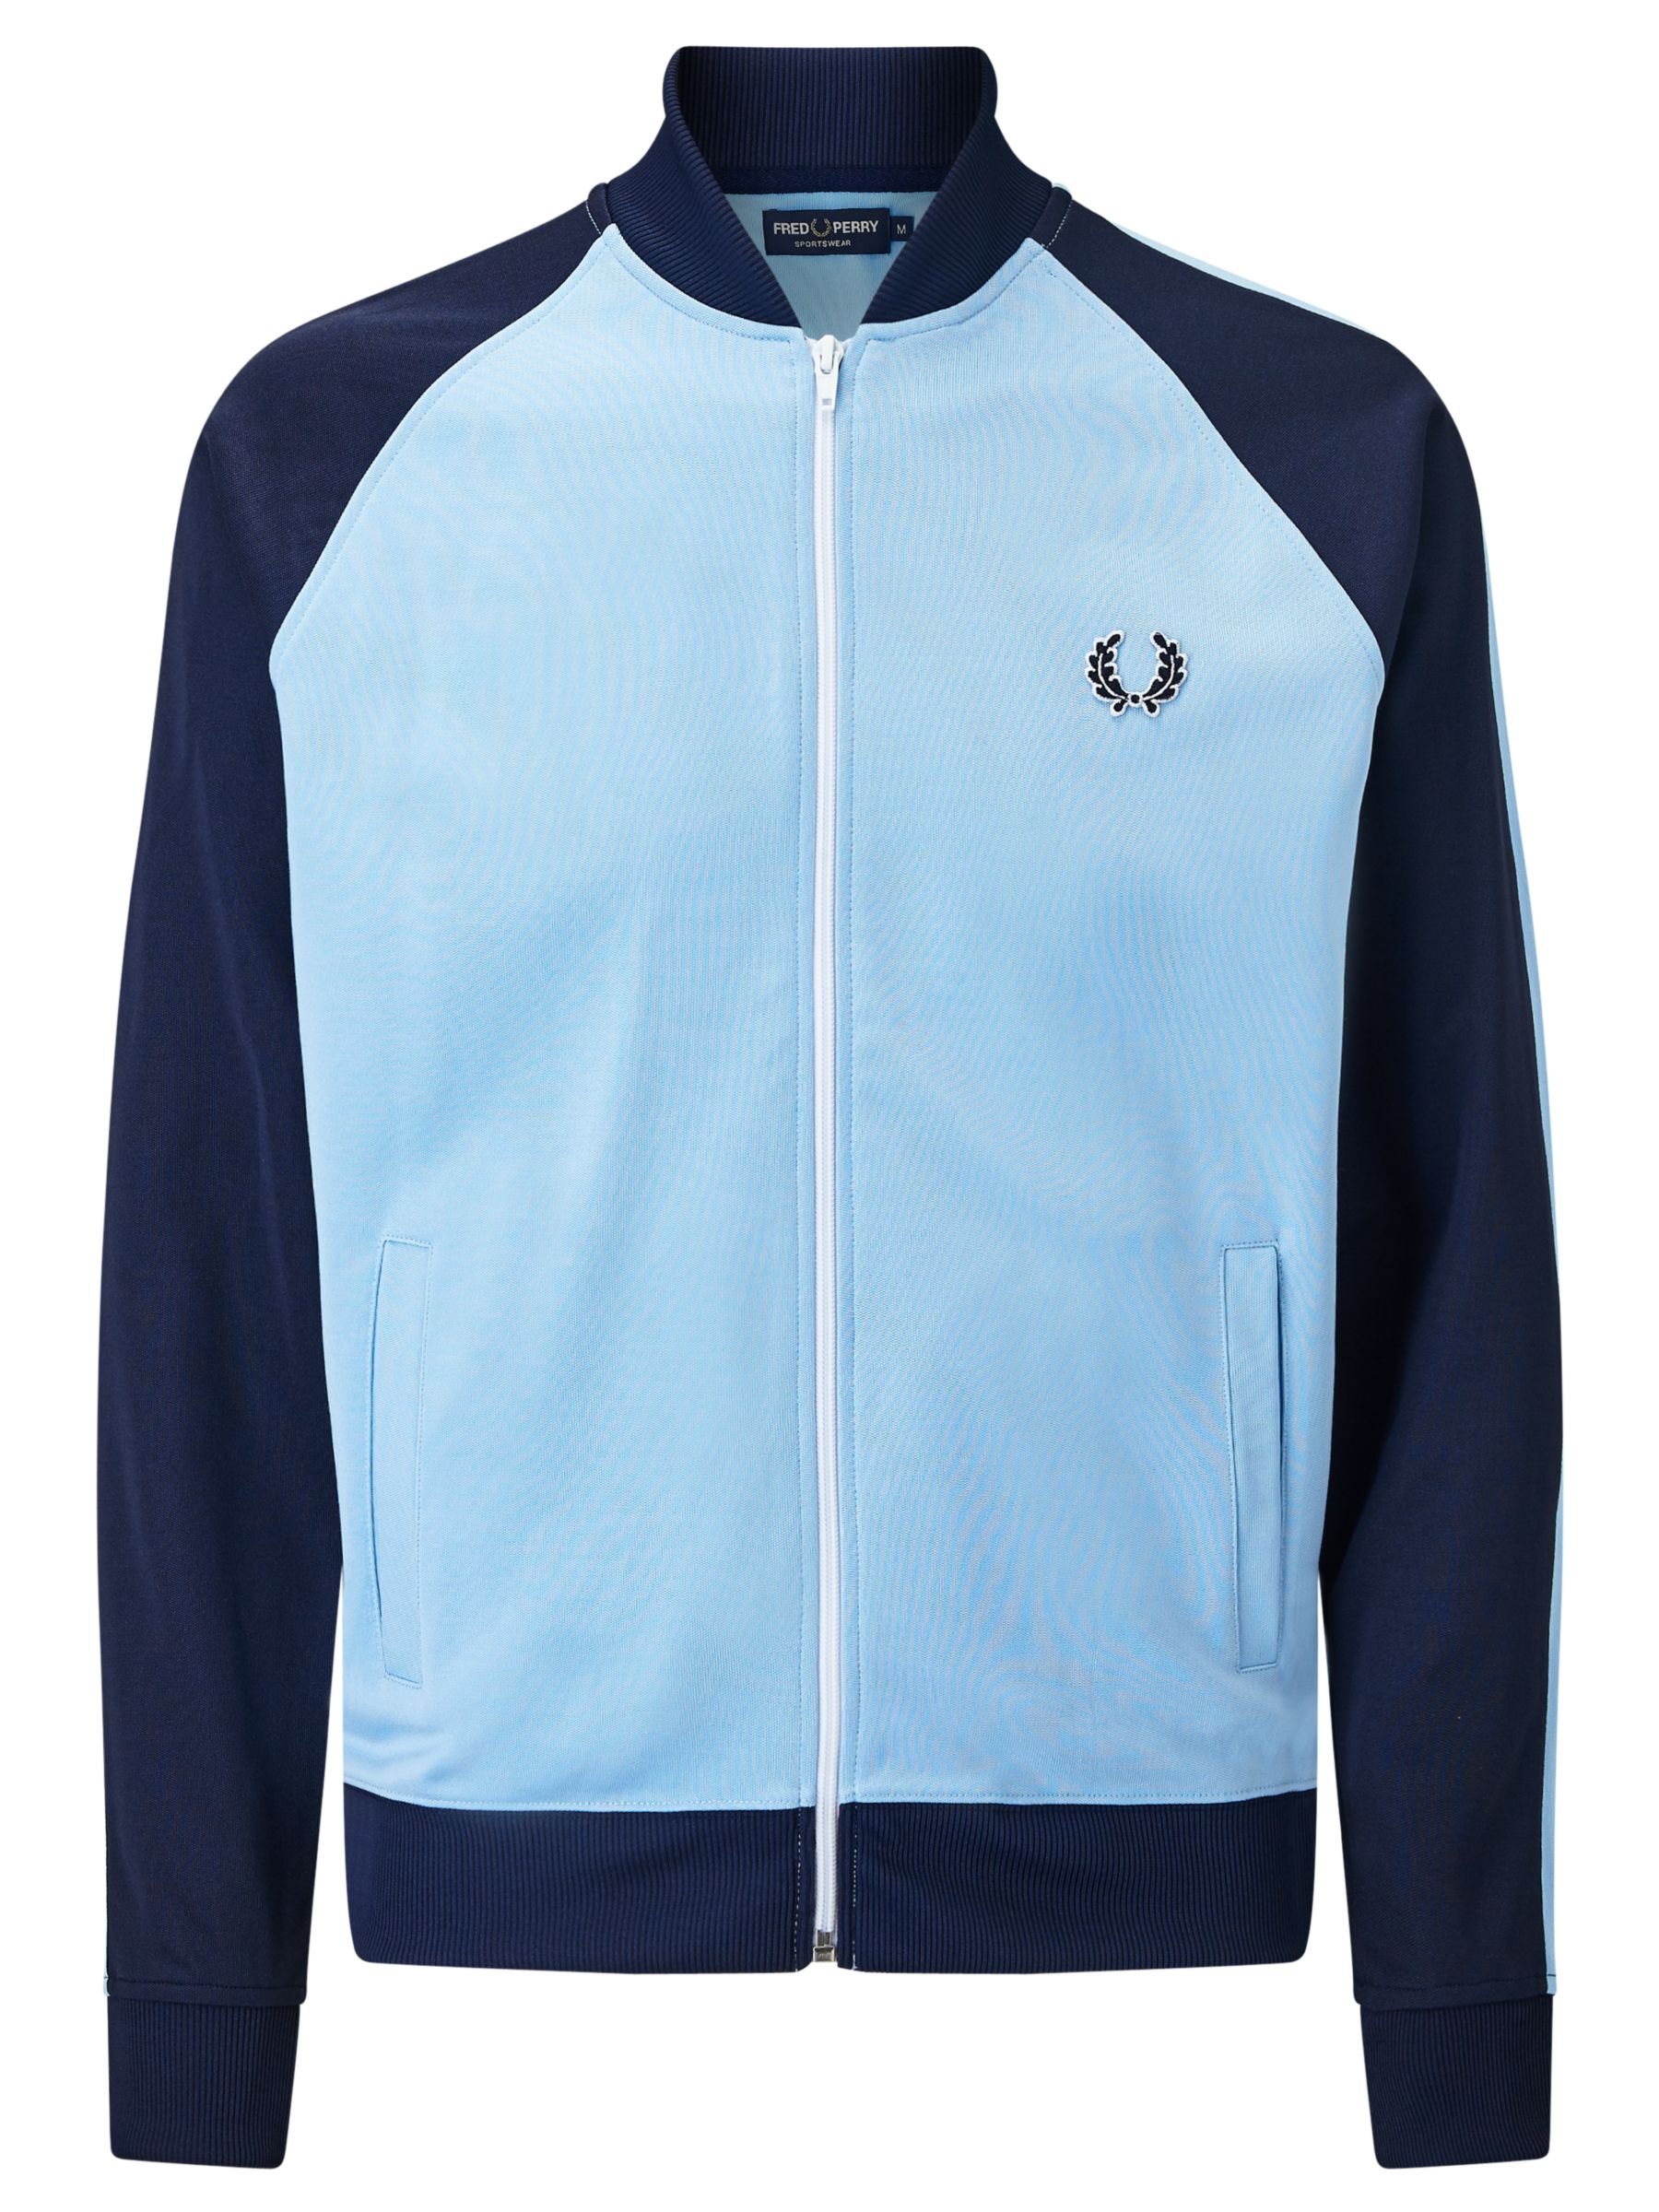 puree Glad Mars Fred Perry Sports Authentic Bomber Track Jacket, Sky Blue